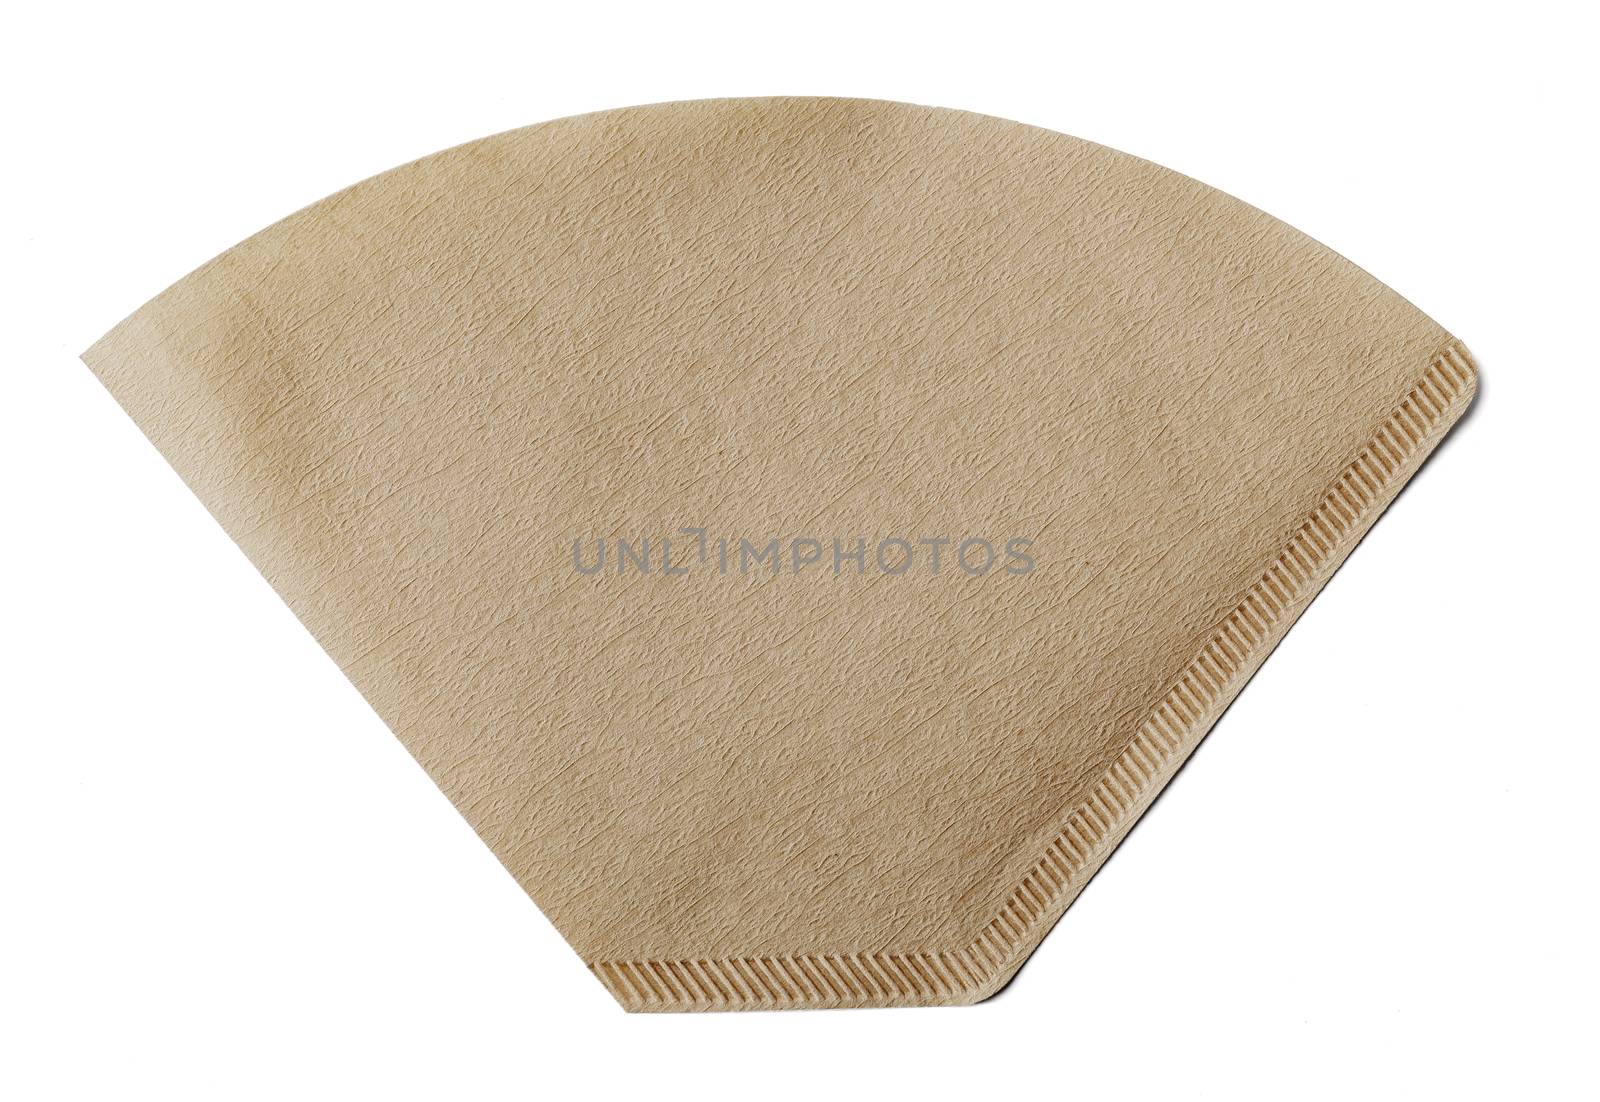 Coffee filter made of paper isolated on white with natural shadow.